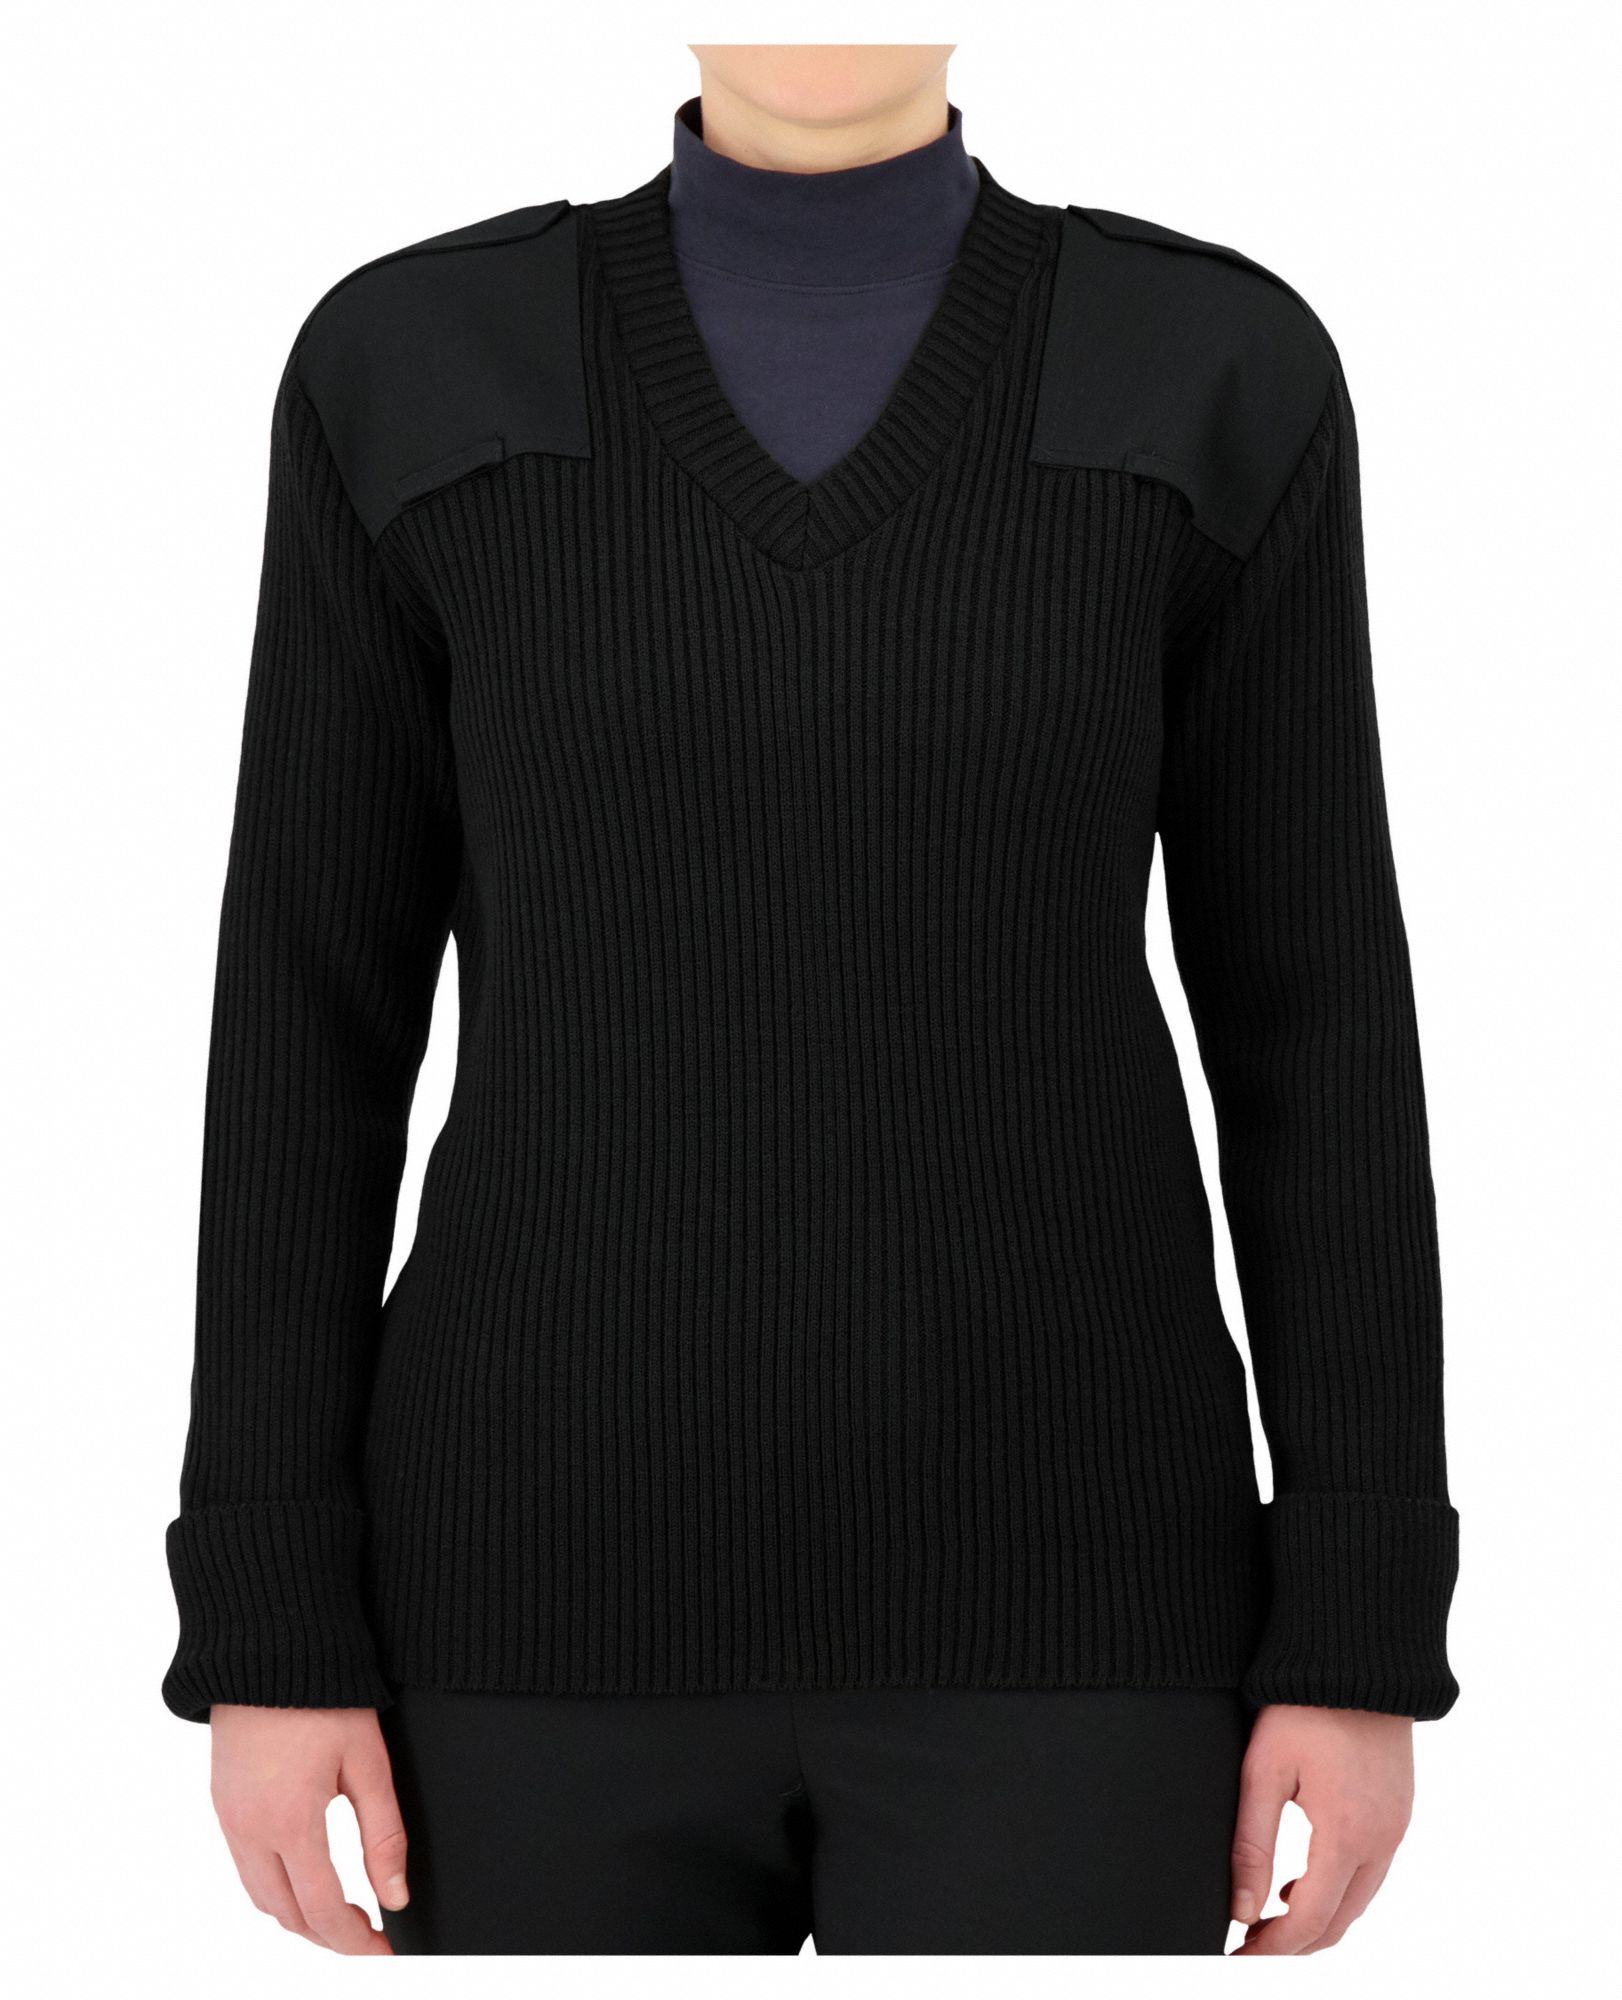 V-Neck Military Sweater: L, 46 in Fits Chest Size, Black, 100% Acrylic Material